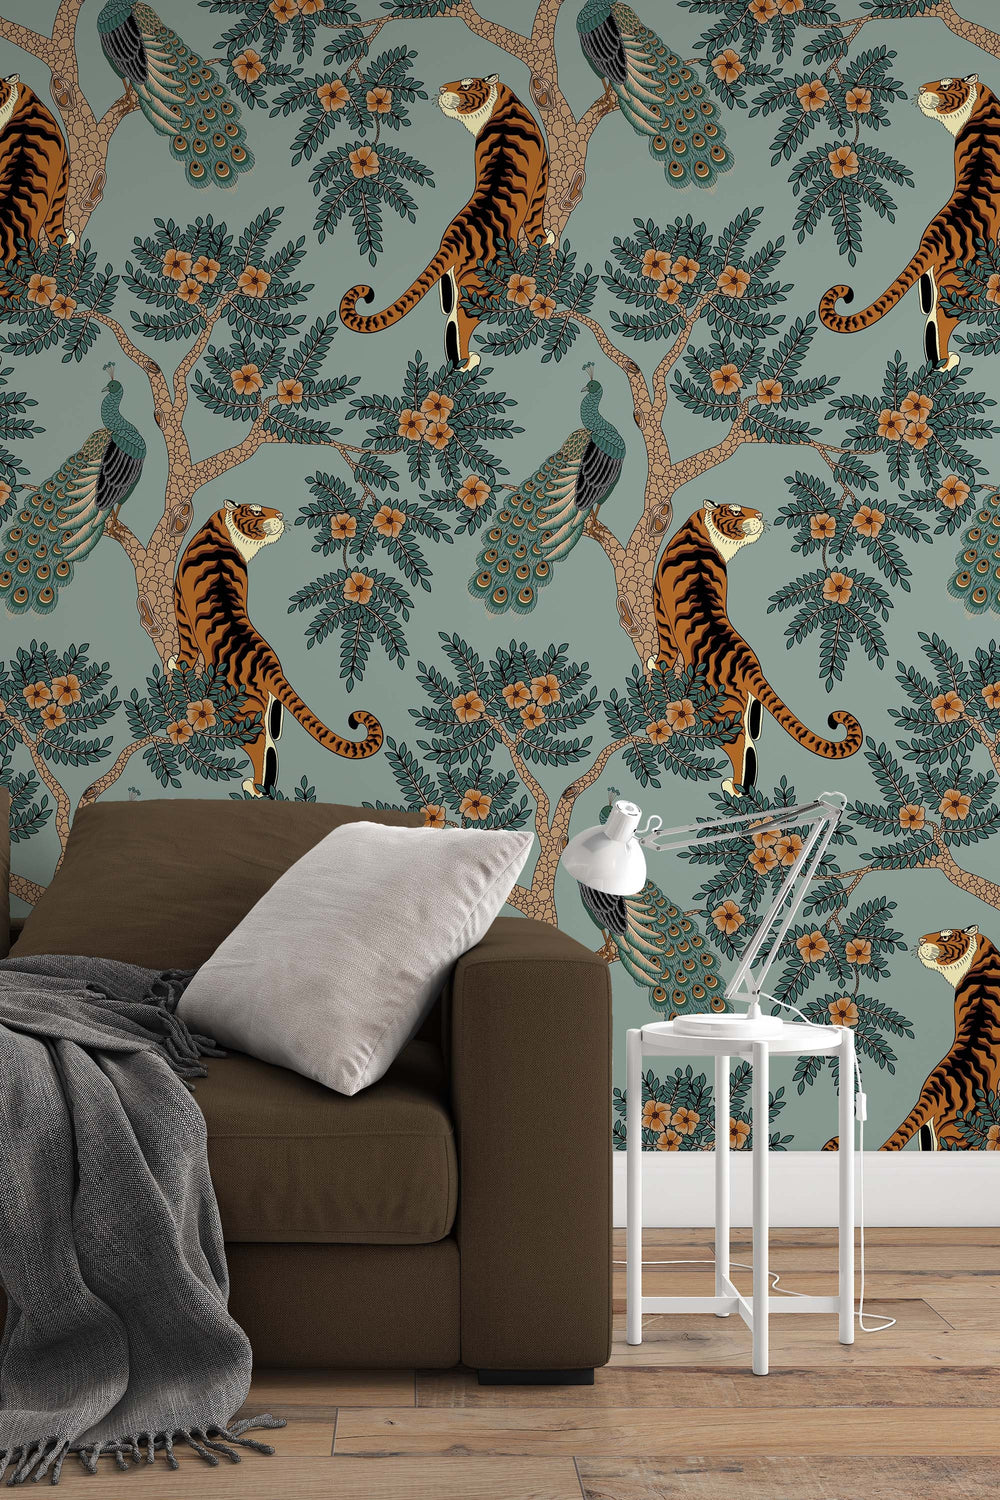 Tiger and Peacock in woods Wallcovering - Peel & Stick Wallpaper - Removable Self Adhesive Wallpaper Roll pattern wallpaper design#3297